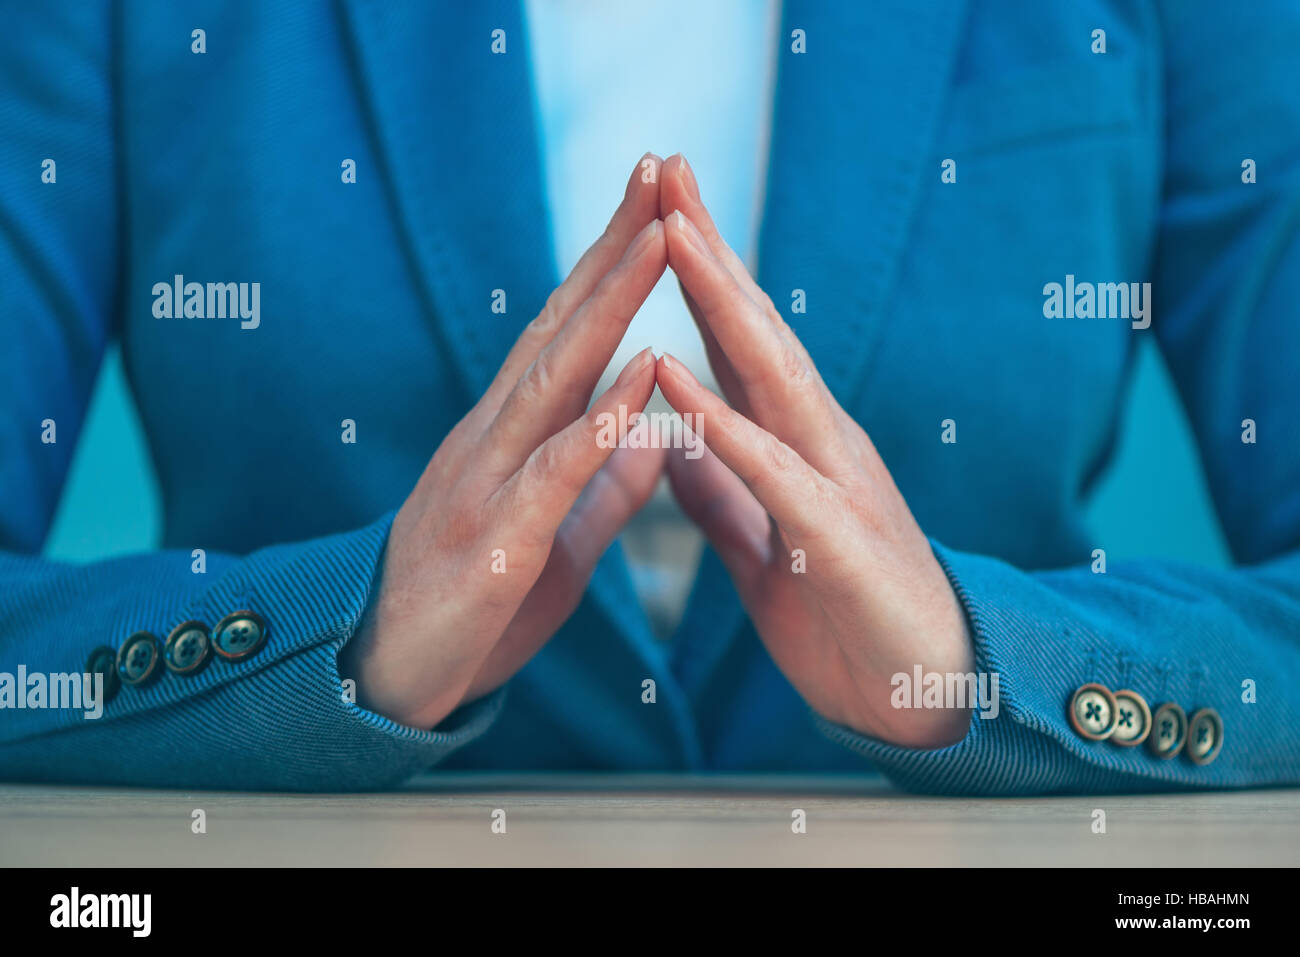 Steepled fingers of business woman as hand gesture sign of confidence, self-esteem, power and domination. Stock Photo